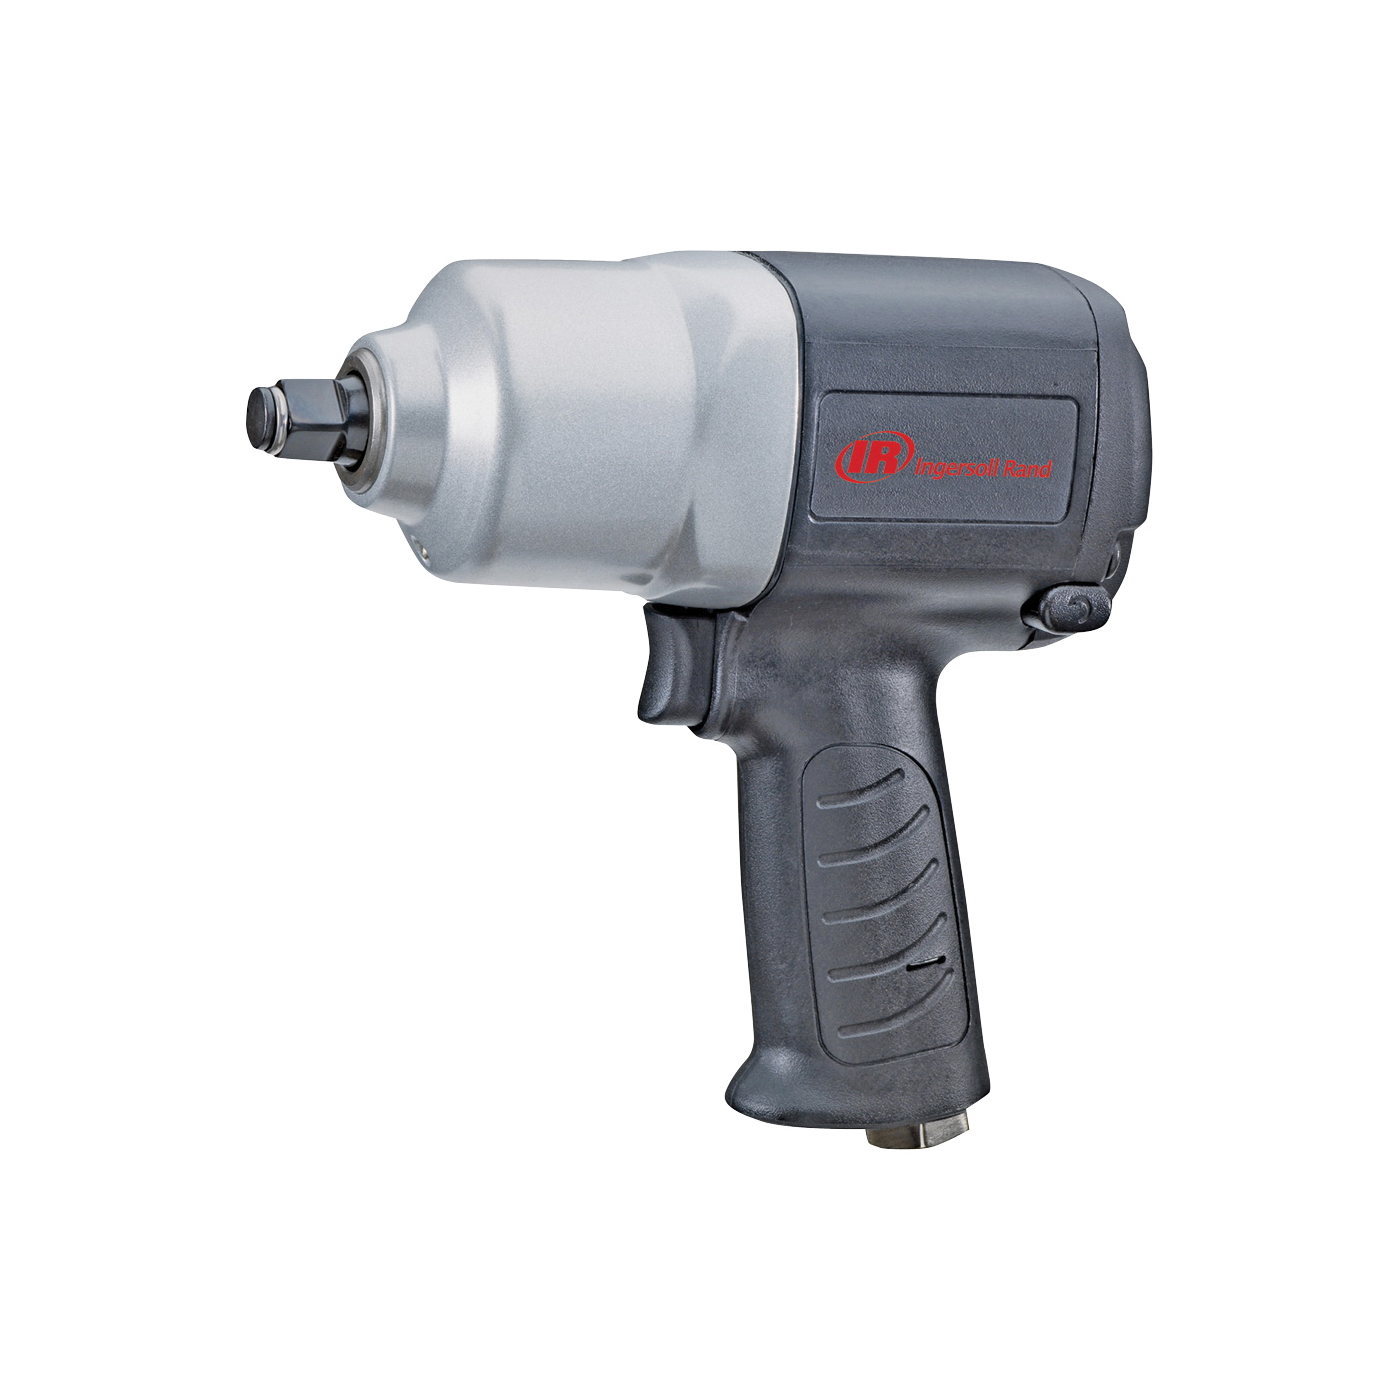 2100G Air Impact Wrench, 1/2 in Drive, 550 ft-lb, 9500 rpm Speed